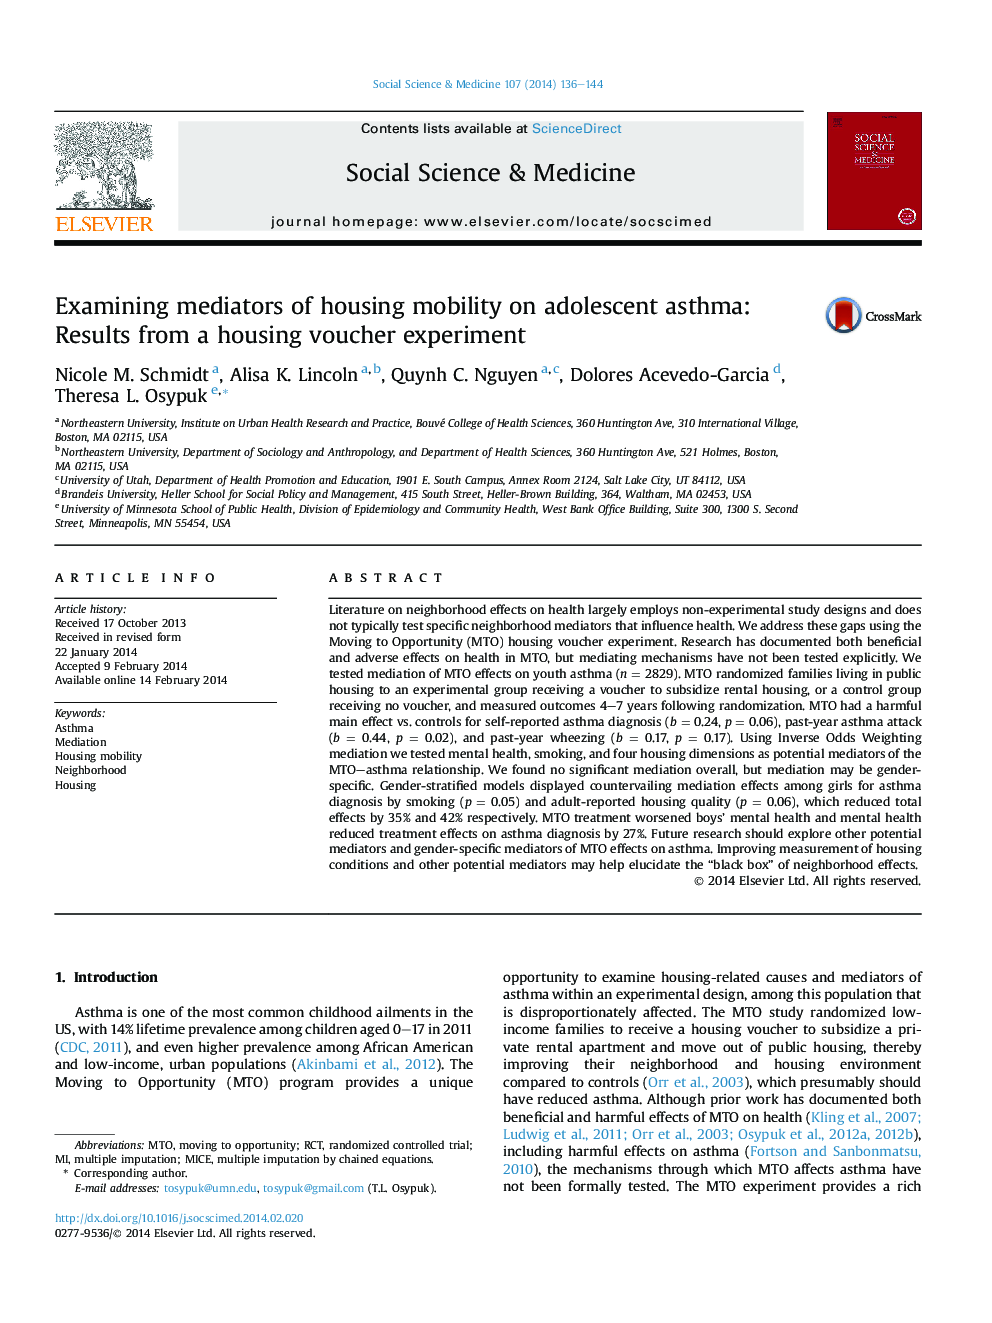 Examining mediators of housing mobility on adolescent asthma: Results from a housing voucher experiment